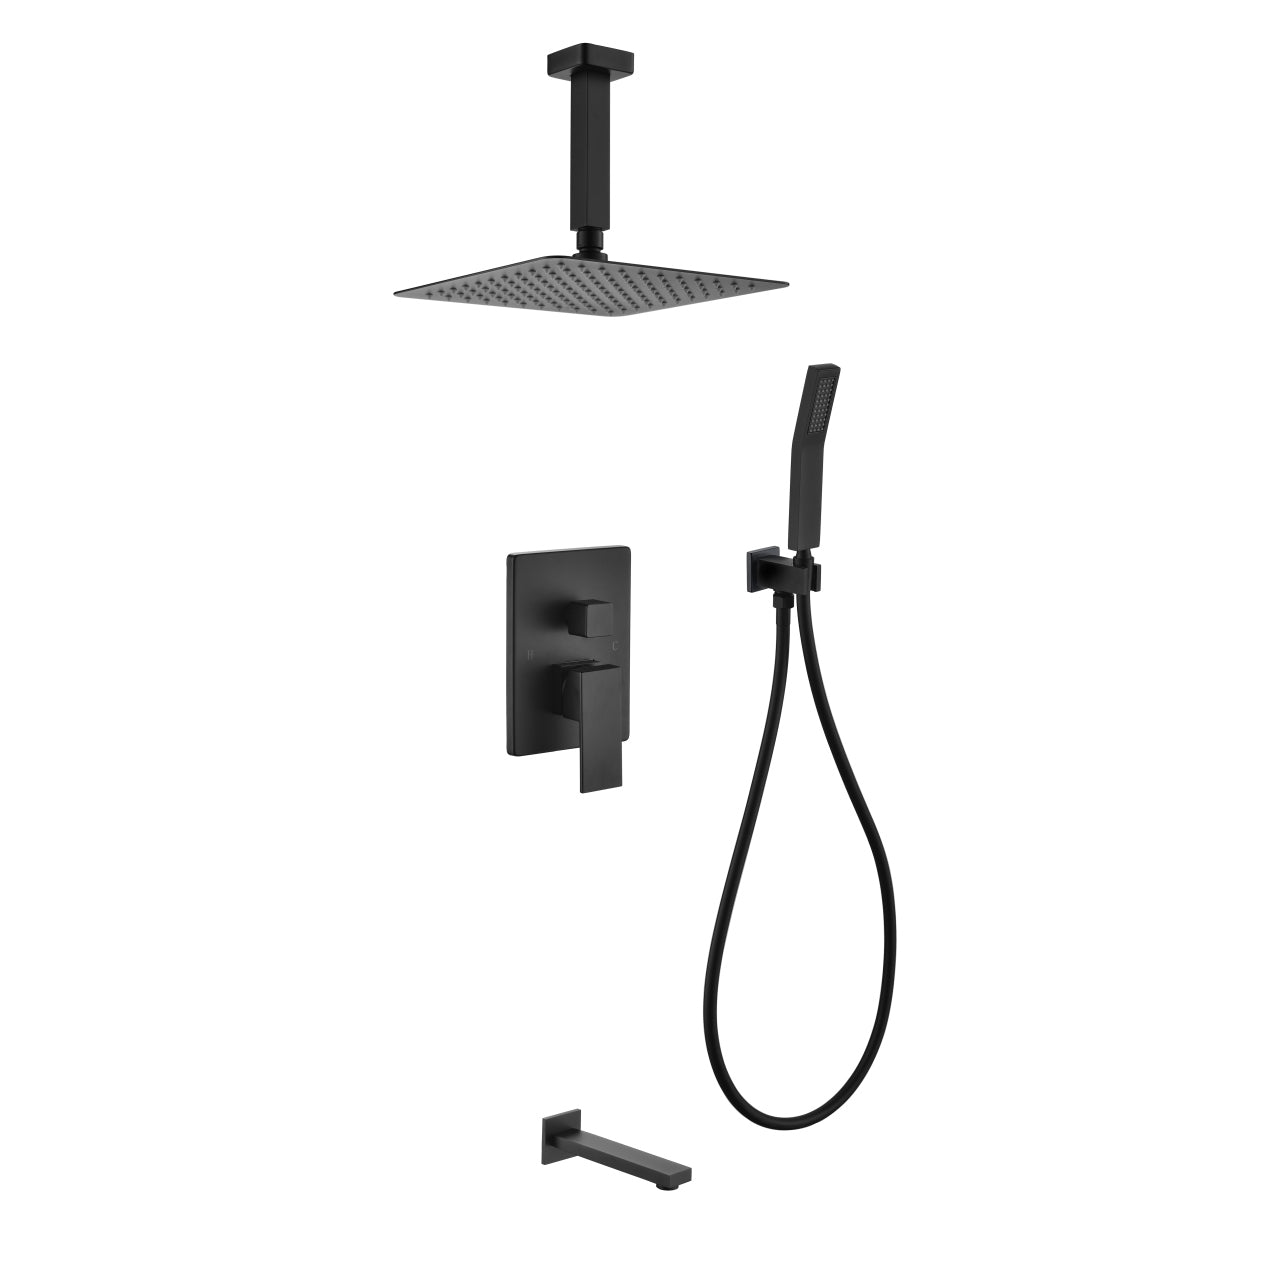 Aqua Piazza Brass Shower Set with Ceiling Mount Square Rain Shower, Handheld and Tub Filler - Home and Bath Depot